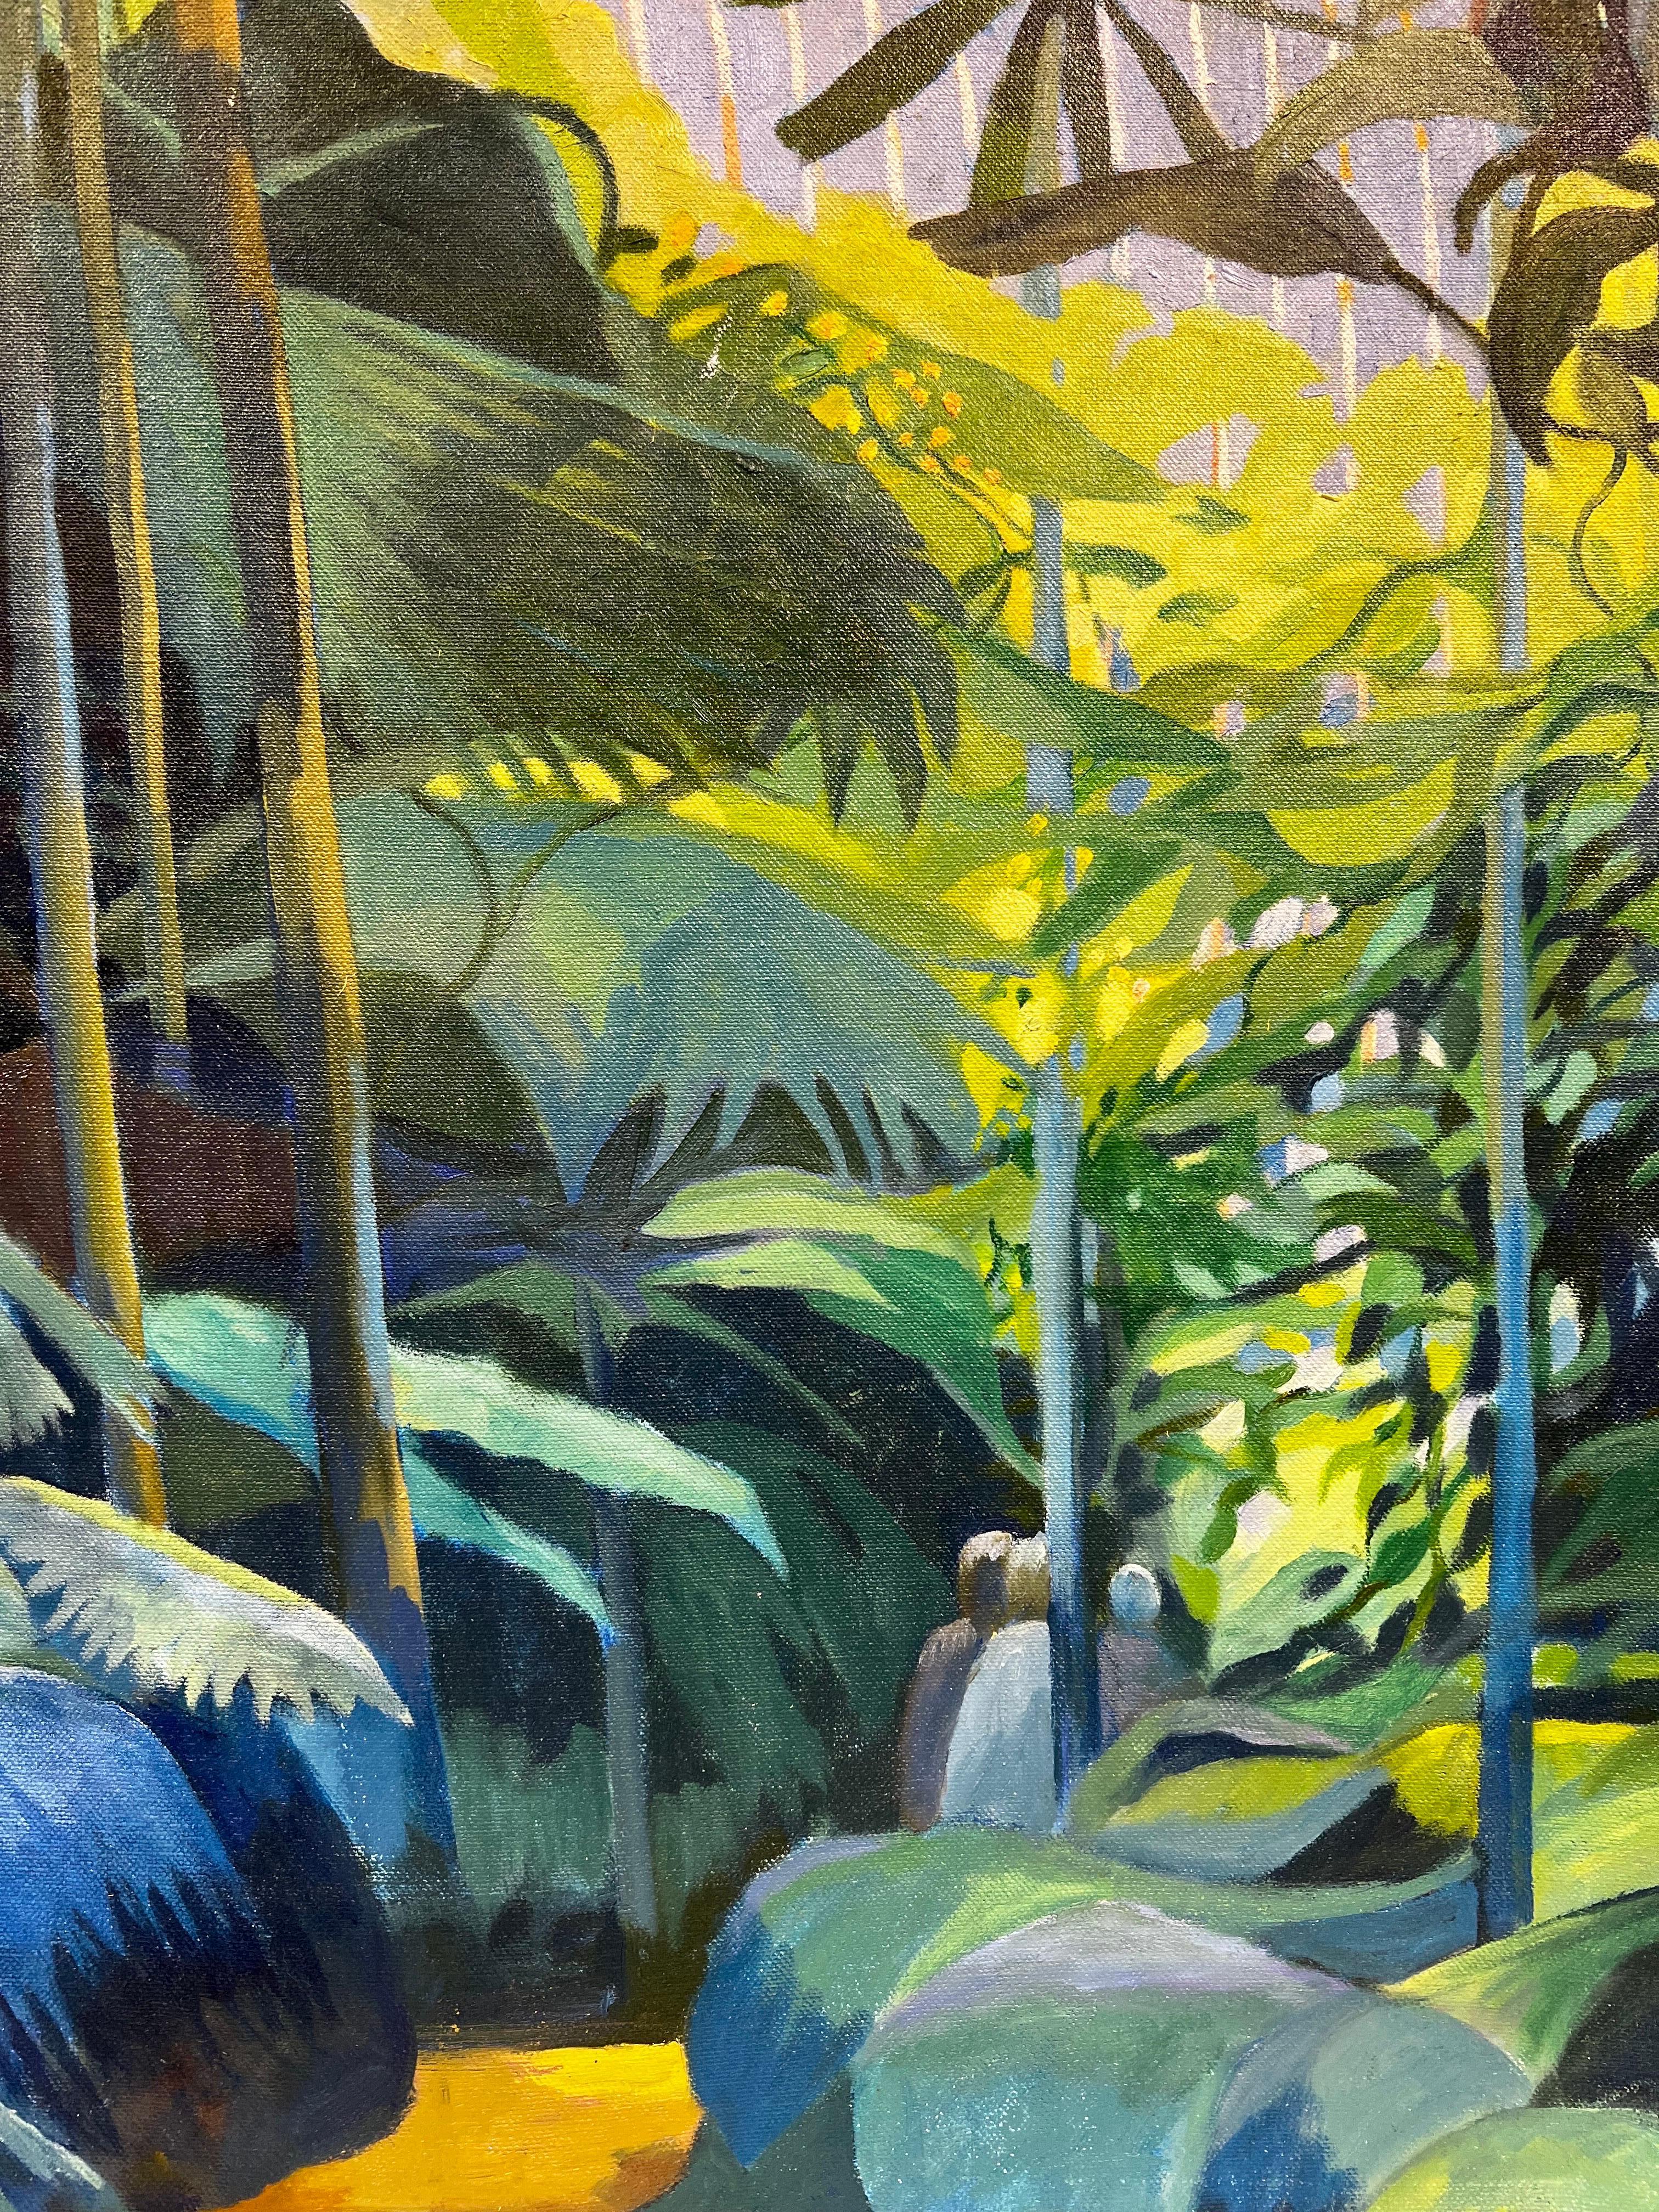 Artist/ School: Modern British School, contemporary, signed with initials lower corner

Title: Exotic plants in an extravagant garden conservatory interior setting.

Medium: oil on canvas, unframed 

Canvas : 34 x 26 inches

Provenance: private